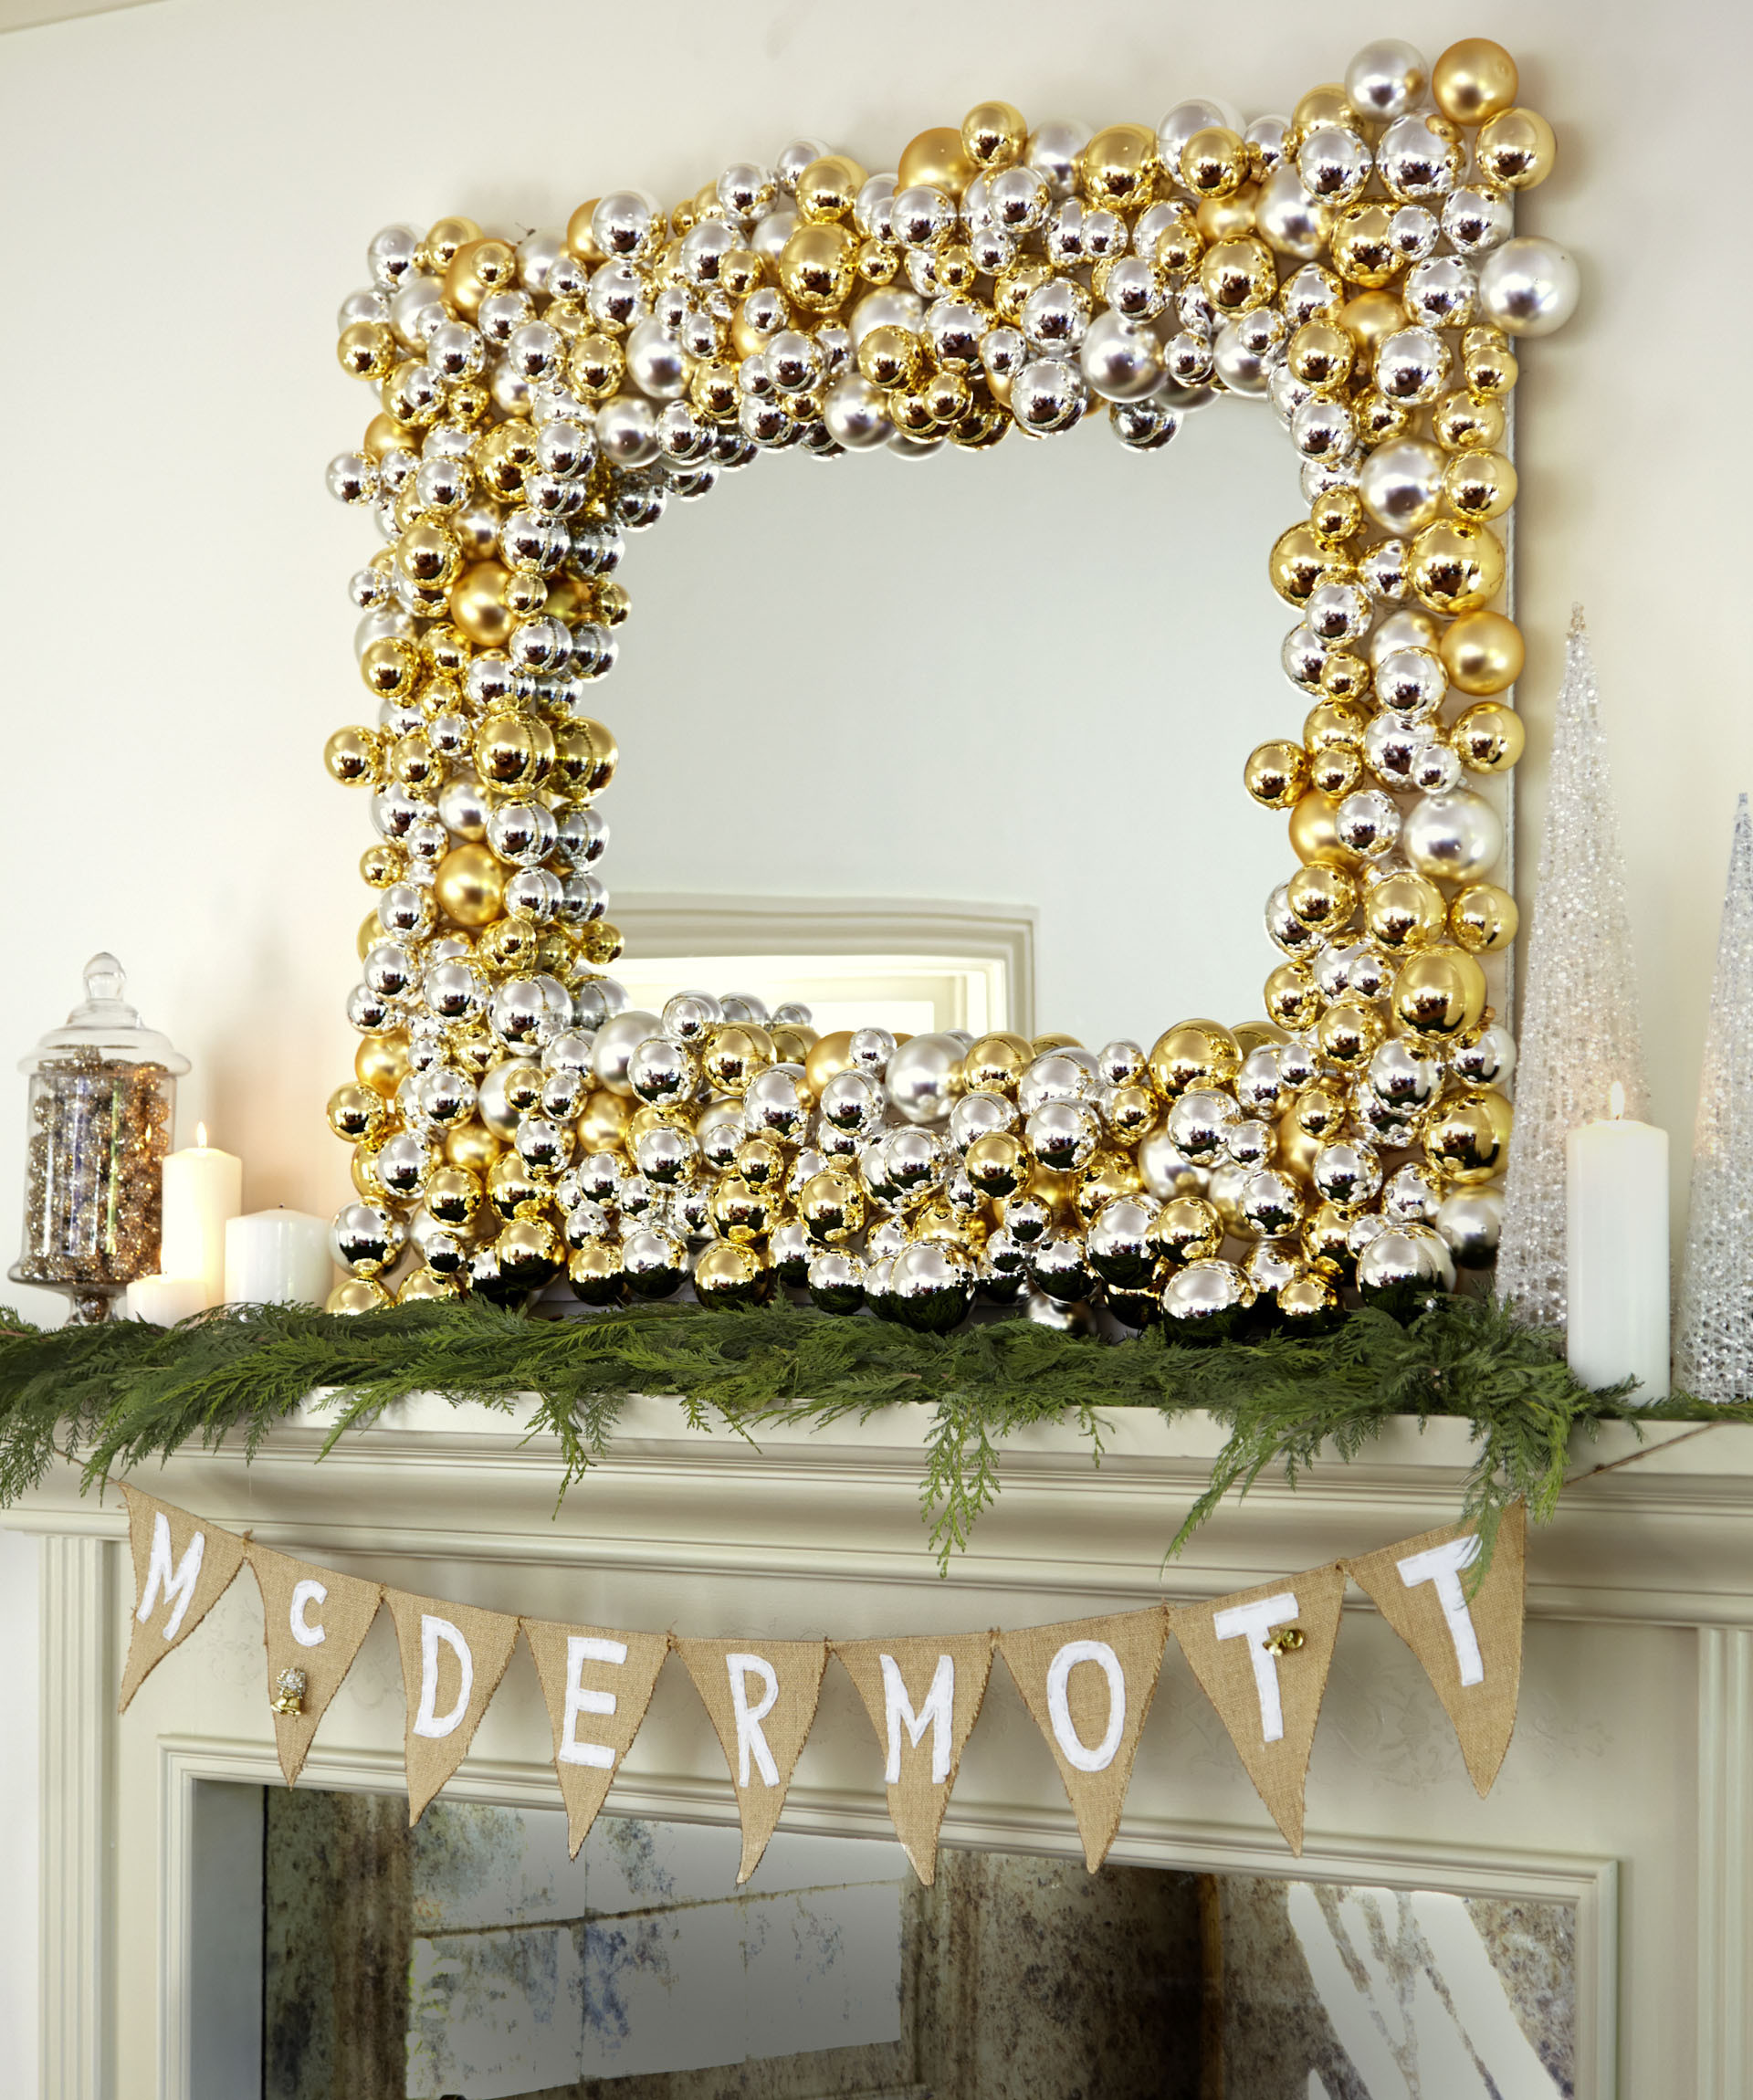 DIY Decorations For Christmas
 DIY Holiday Decor Ideas From Tori Spelling Easy DIY